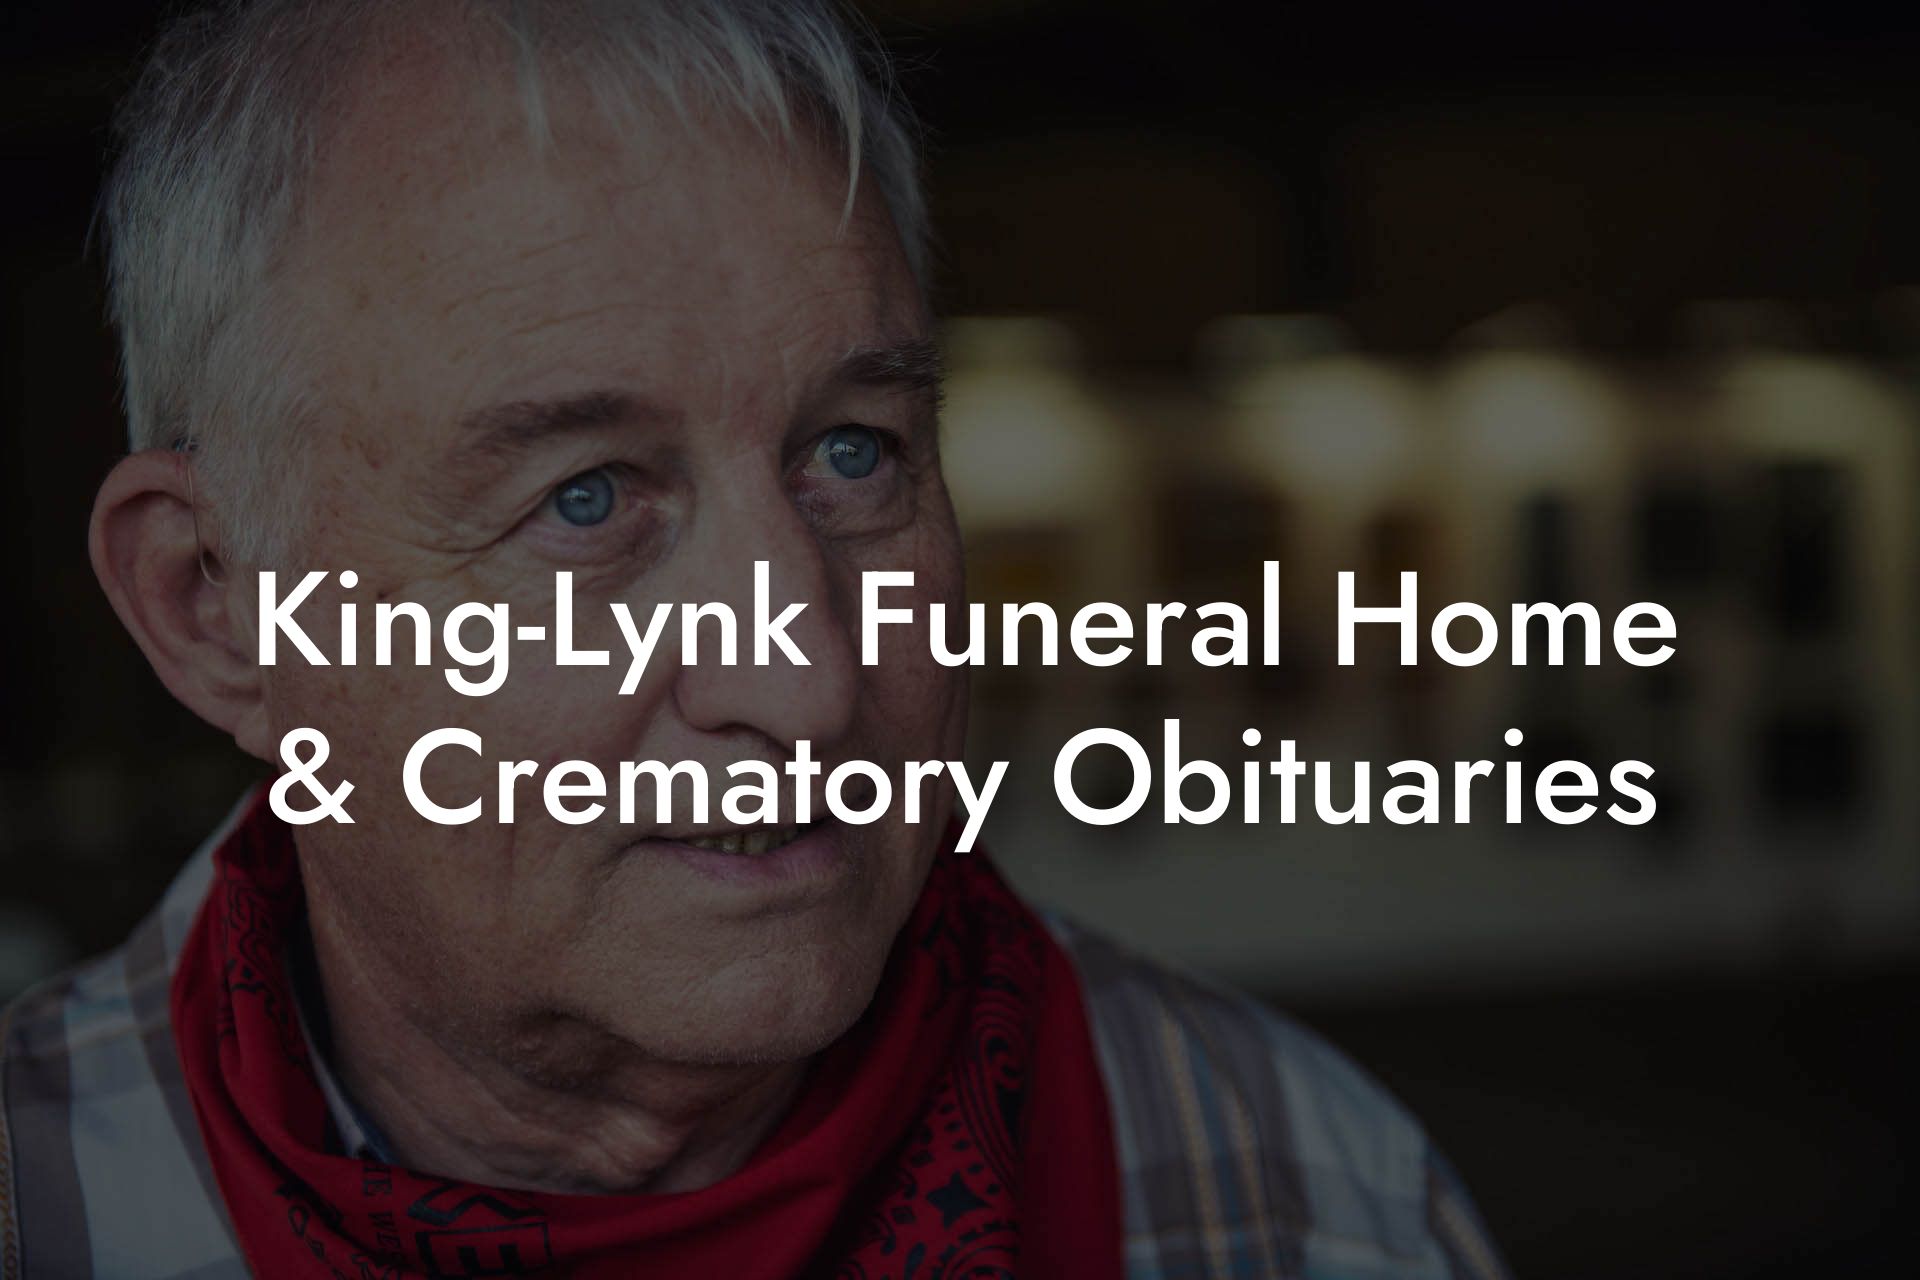 King-Lynk Funeral Home & Crematory Obituaries